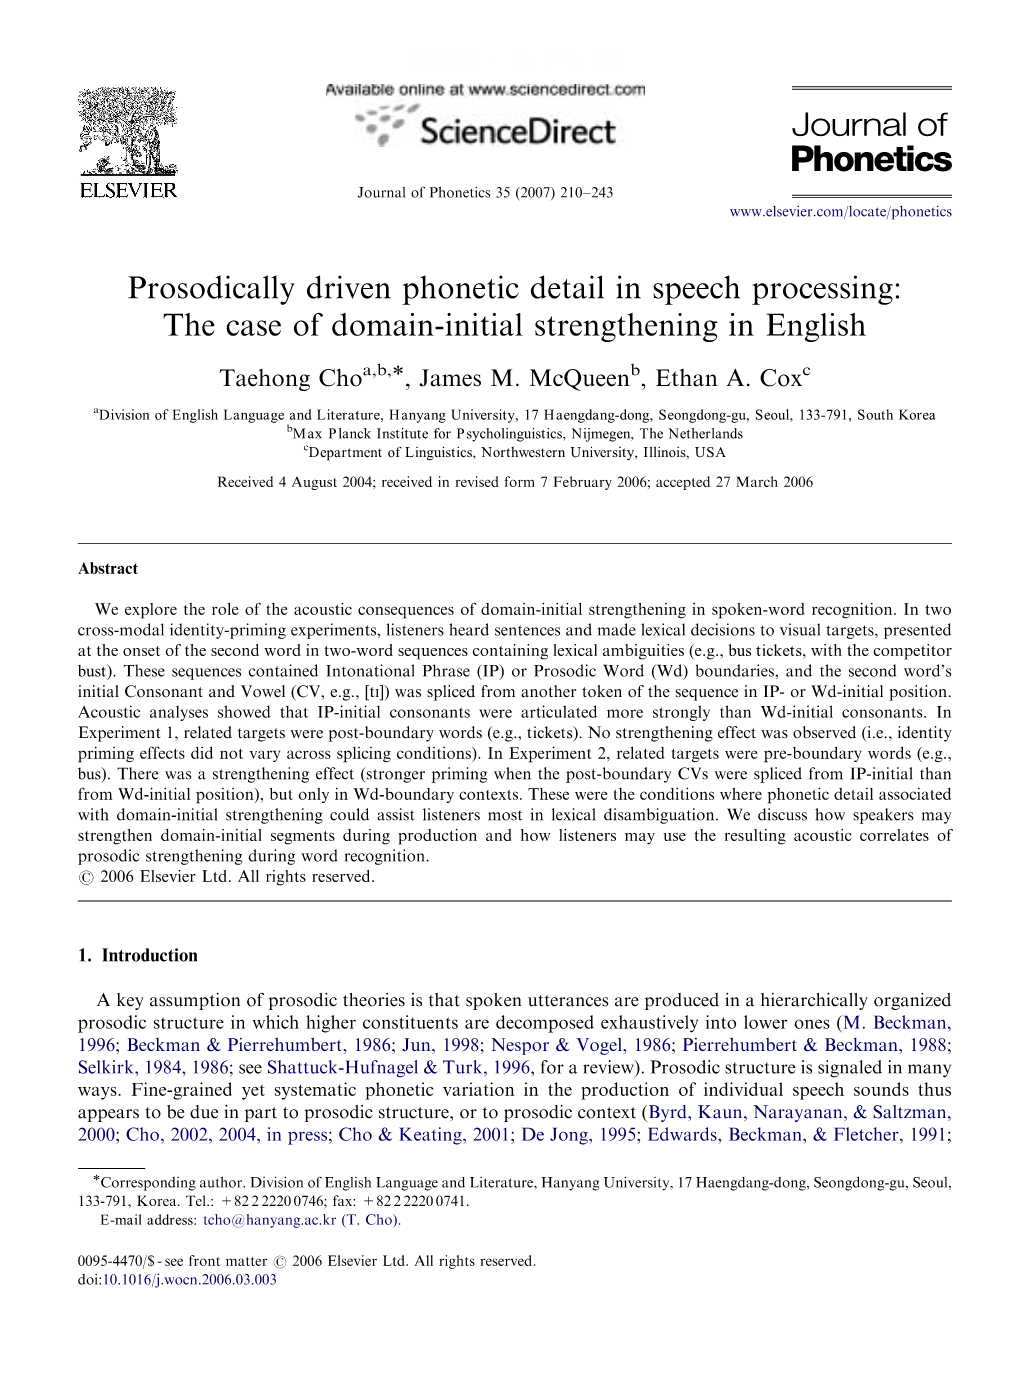 Prosodically Driven Phonetic Detail in Speech Processing: the Case of Domain-Initial Strengthening in English